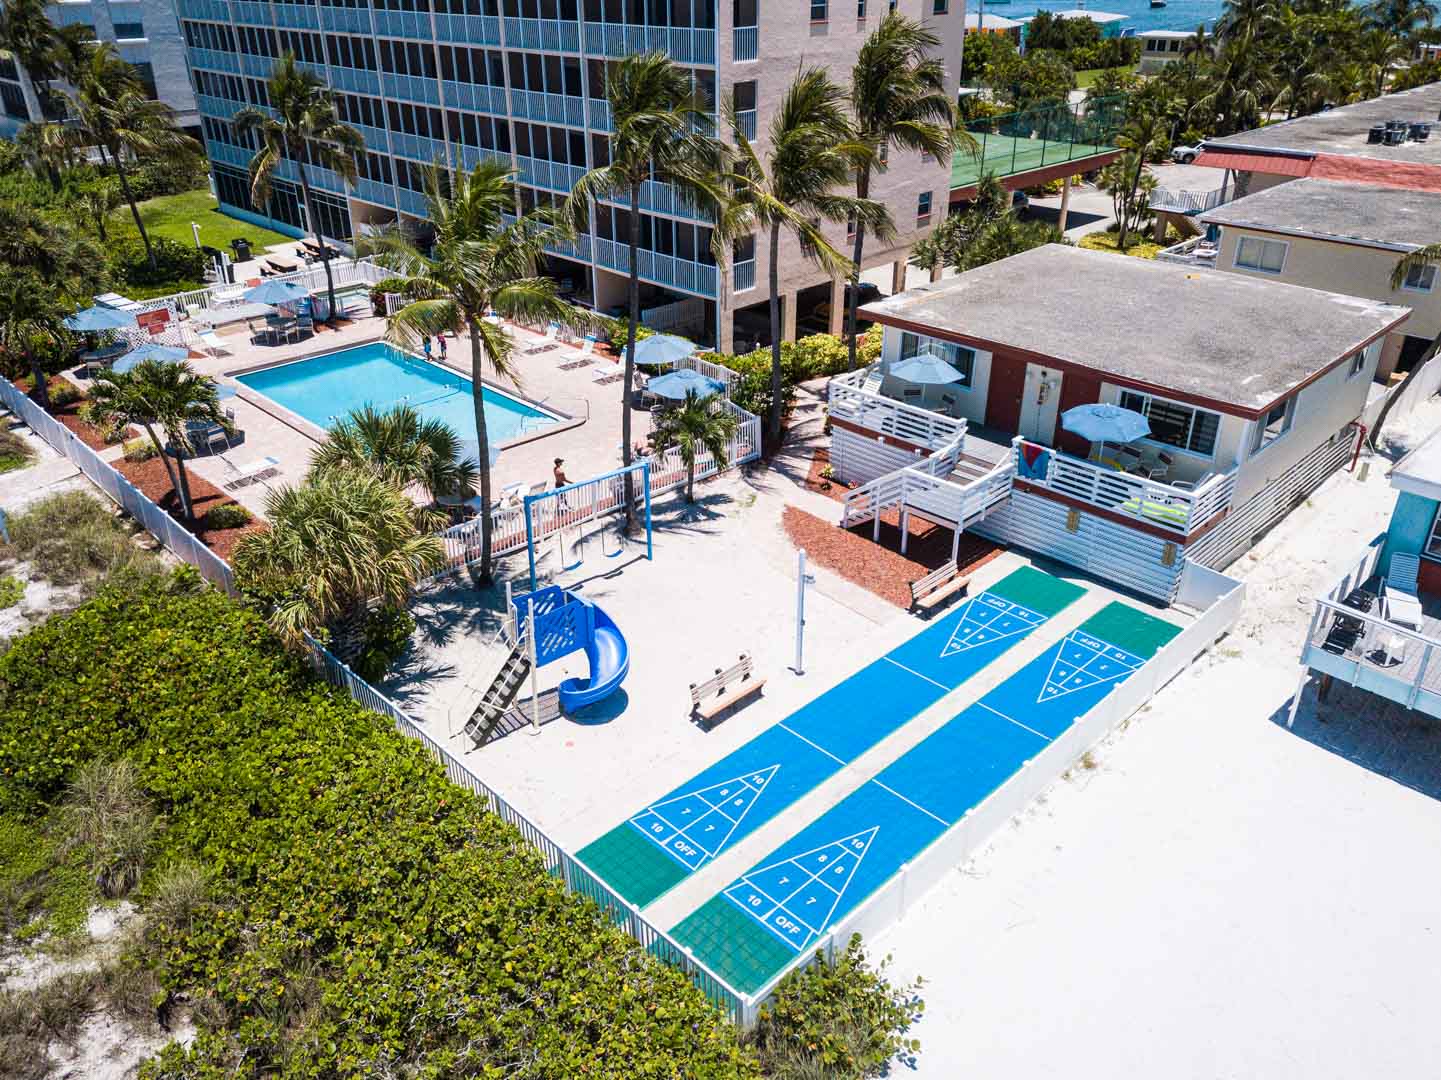 A view of the outdoor amenities at VRI's Windward Passage Resort in Fort Myers Beach, Florida.